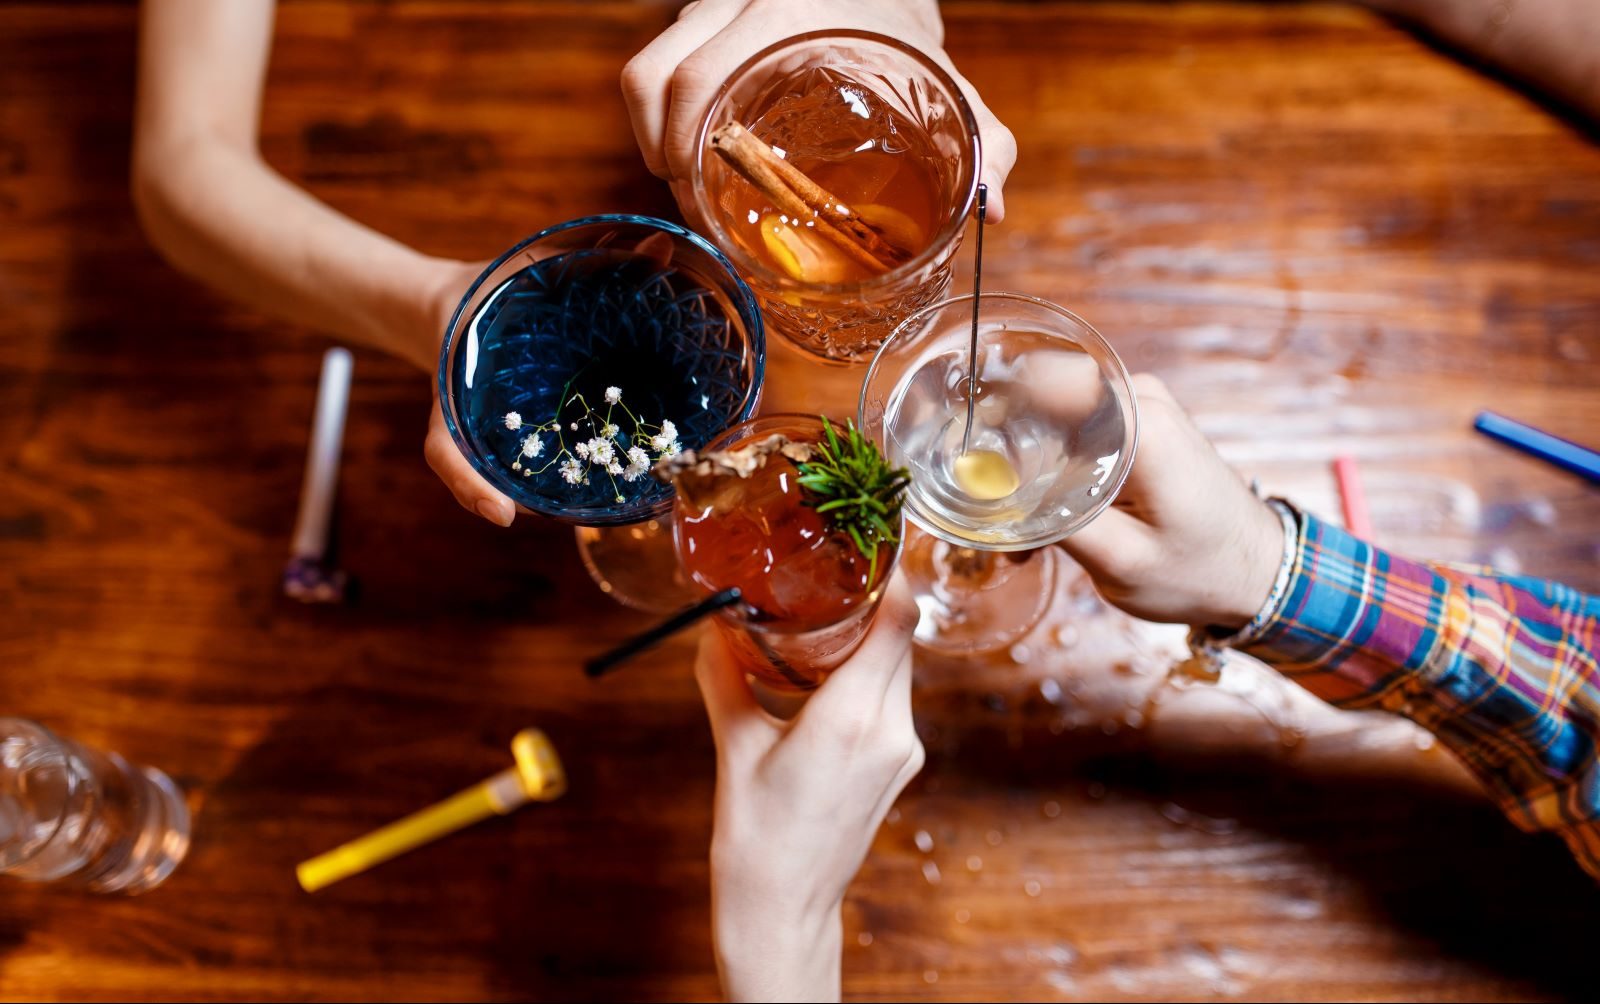 We’ve heard for years that moderate drinking is not only okay, but maybe even good for our health. But new information has been uncorked.